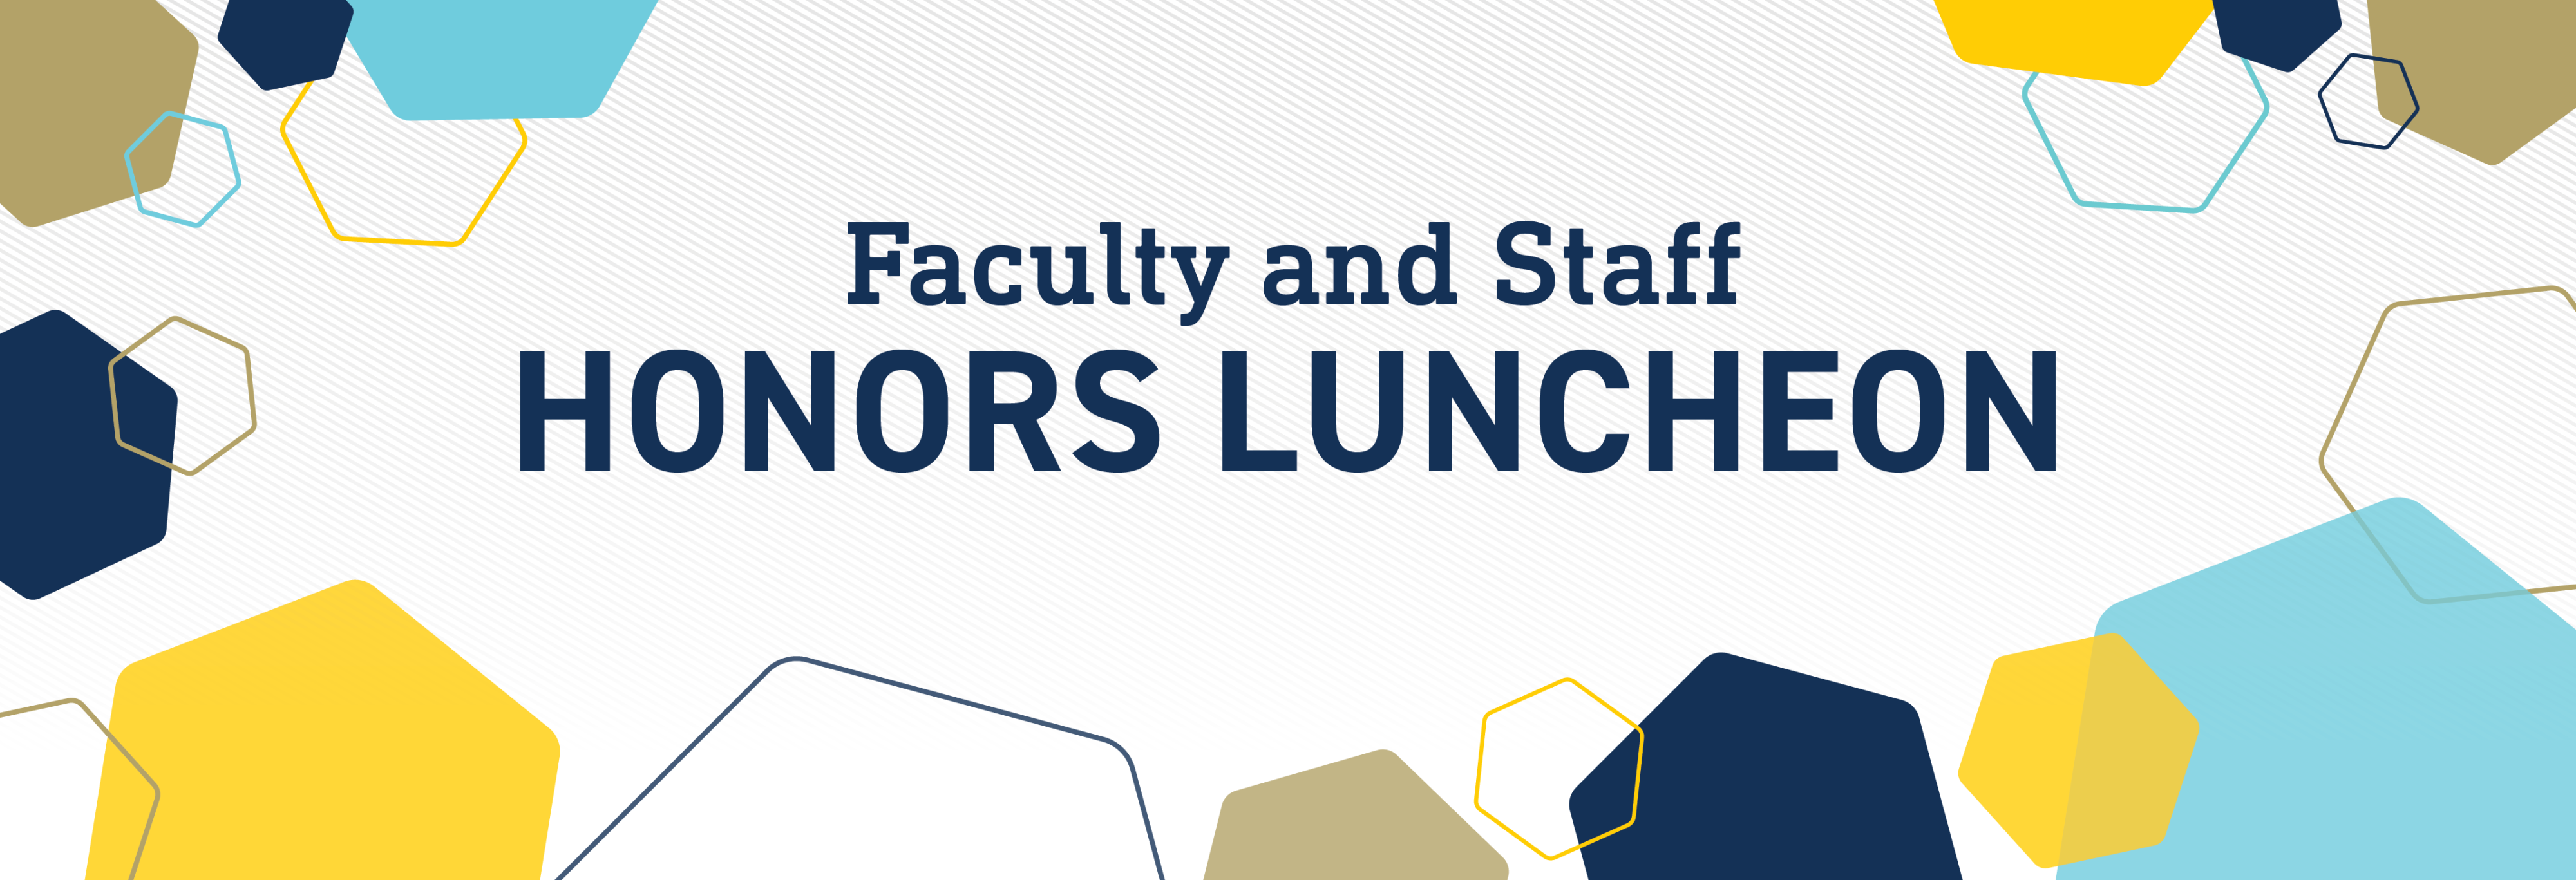 Faculty Staff Honors Luncheon